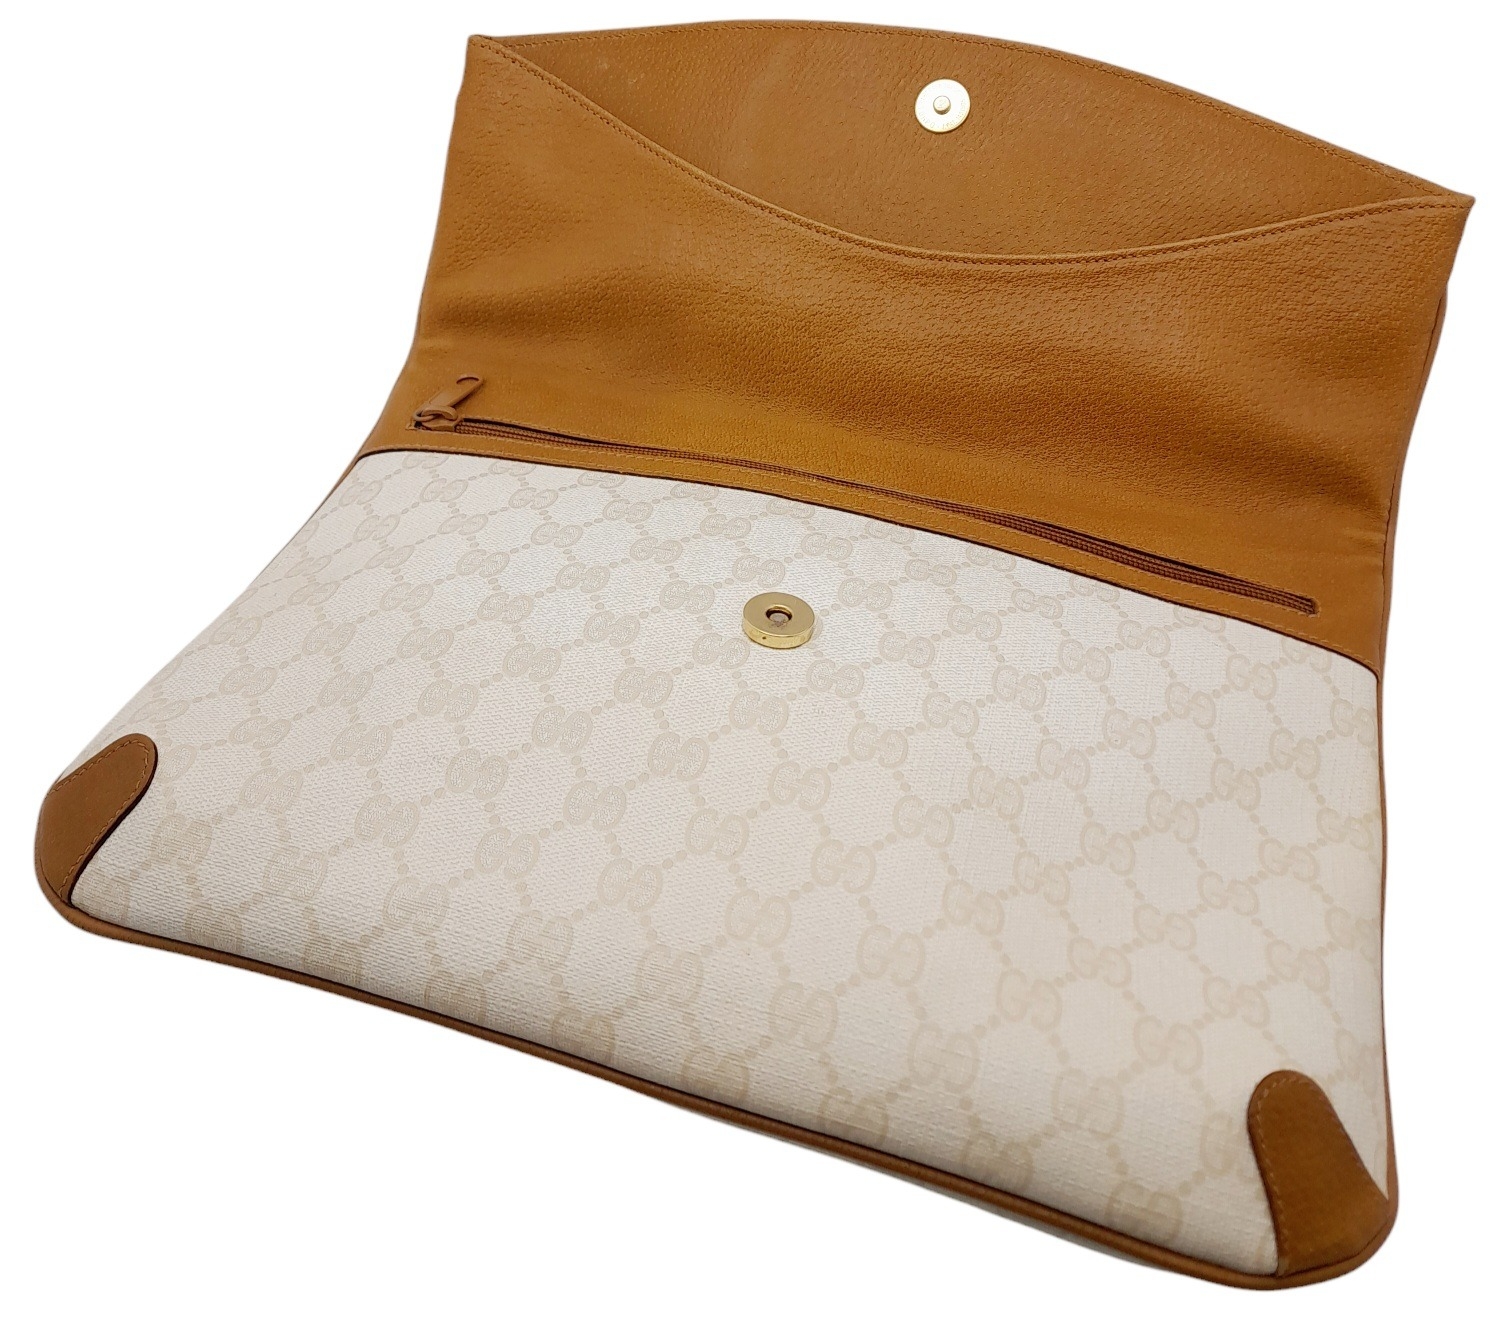 A Gucci Ivory GG Monogram Clutch Bag. Leather exterior with brown trim, gold and silver-toned GG, - Image 3 of 10